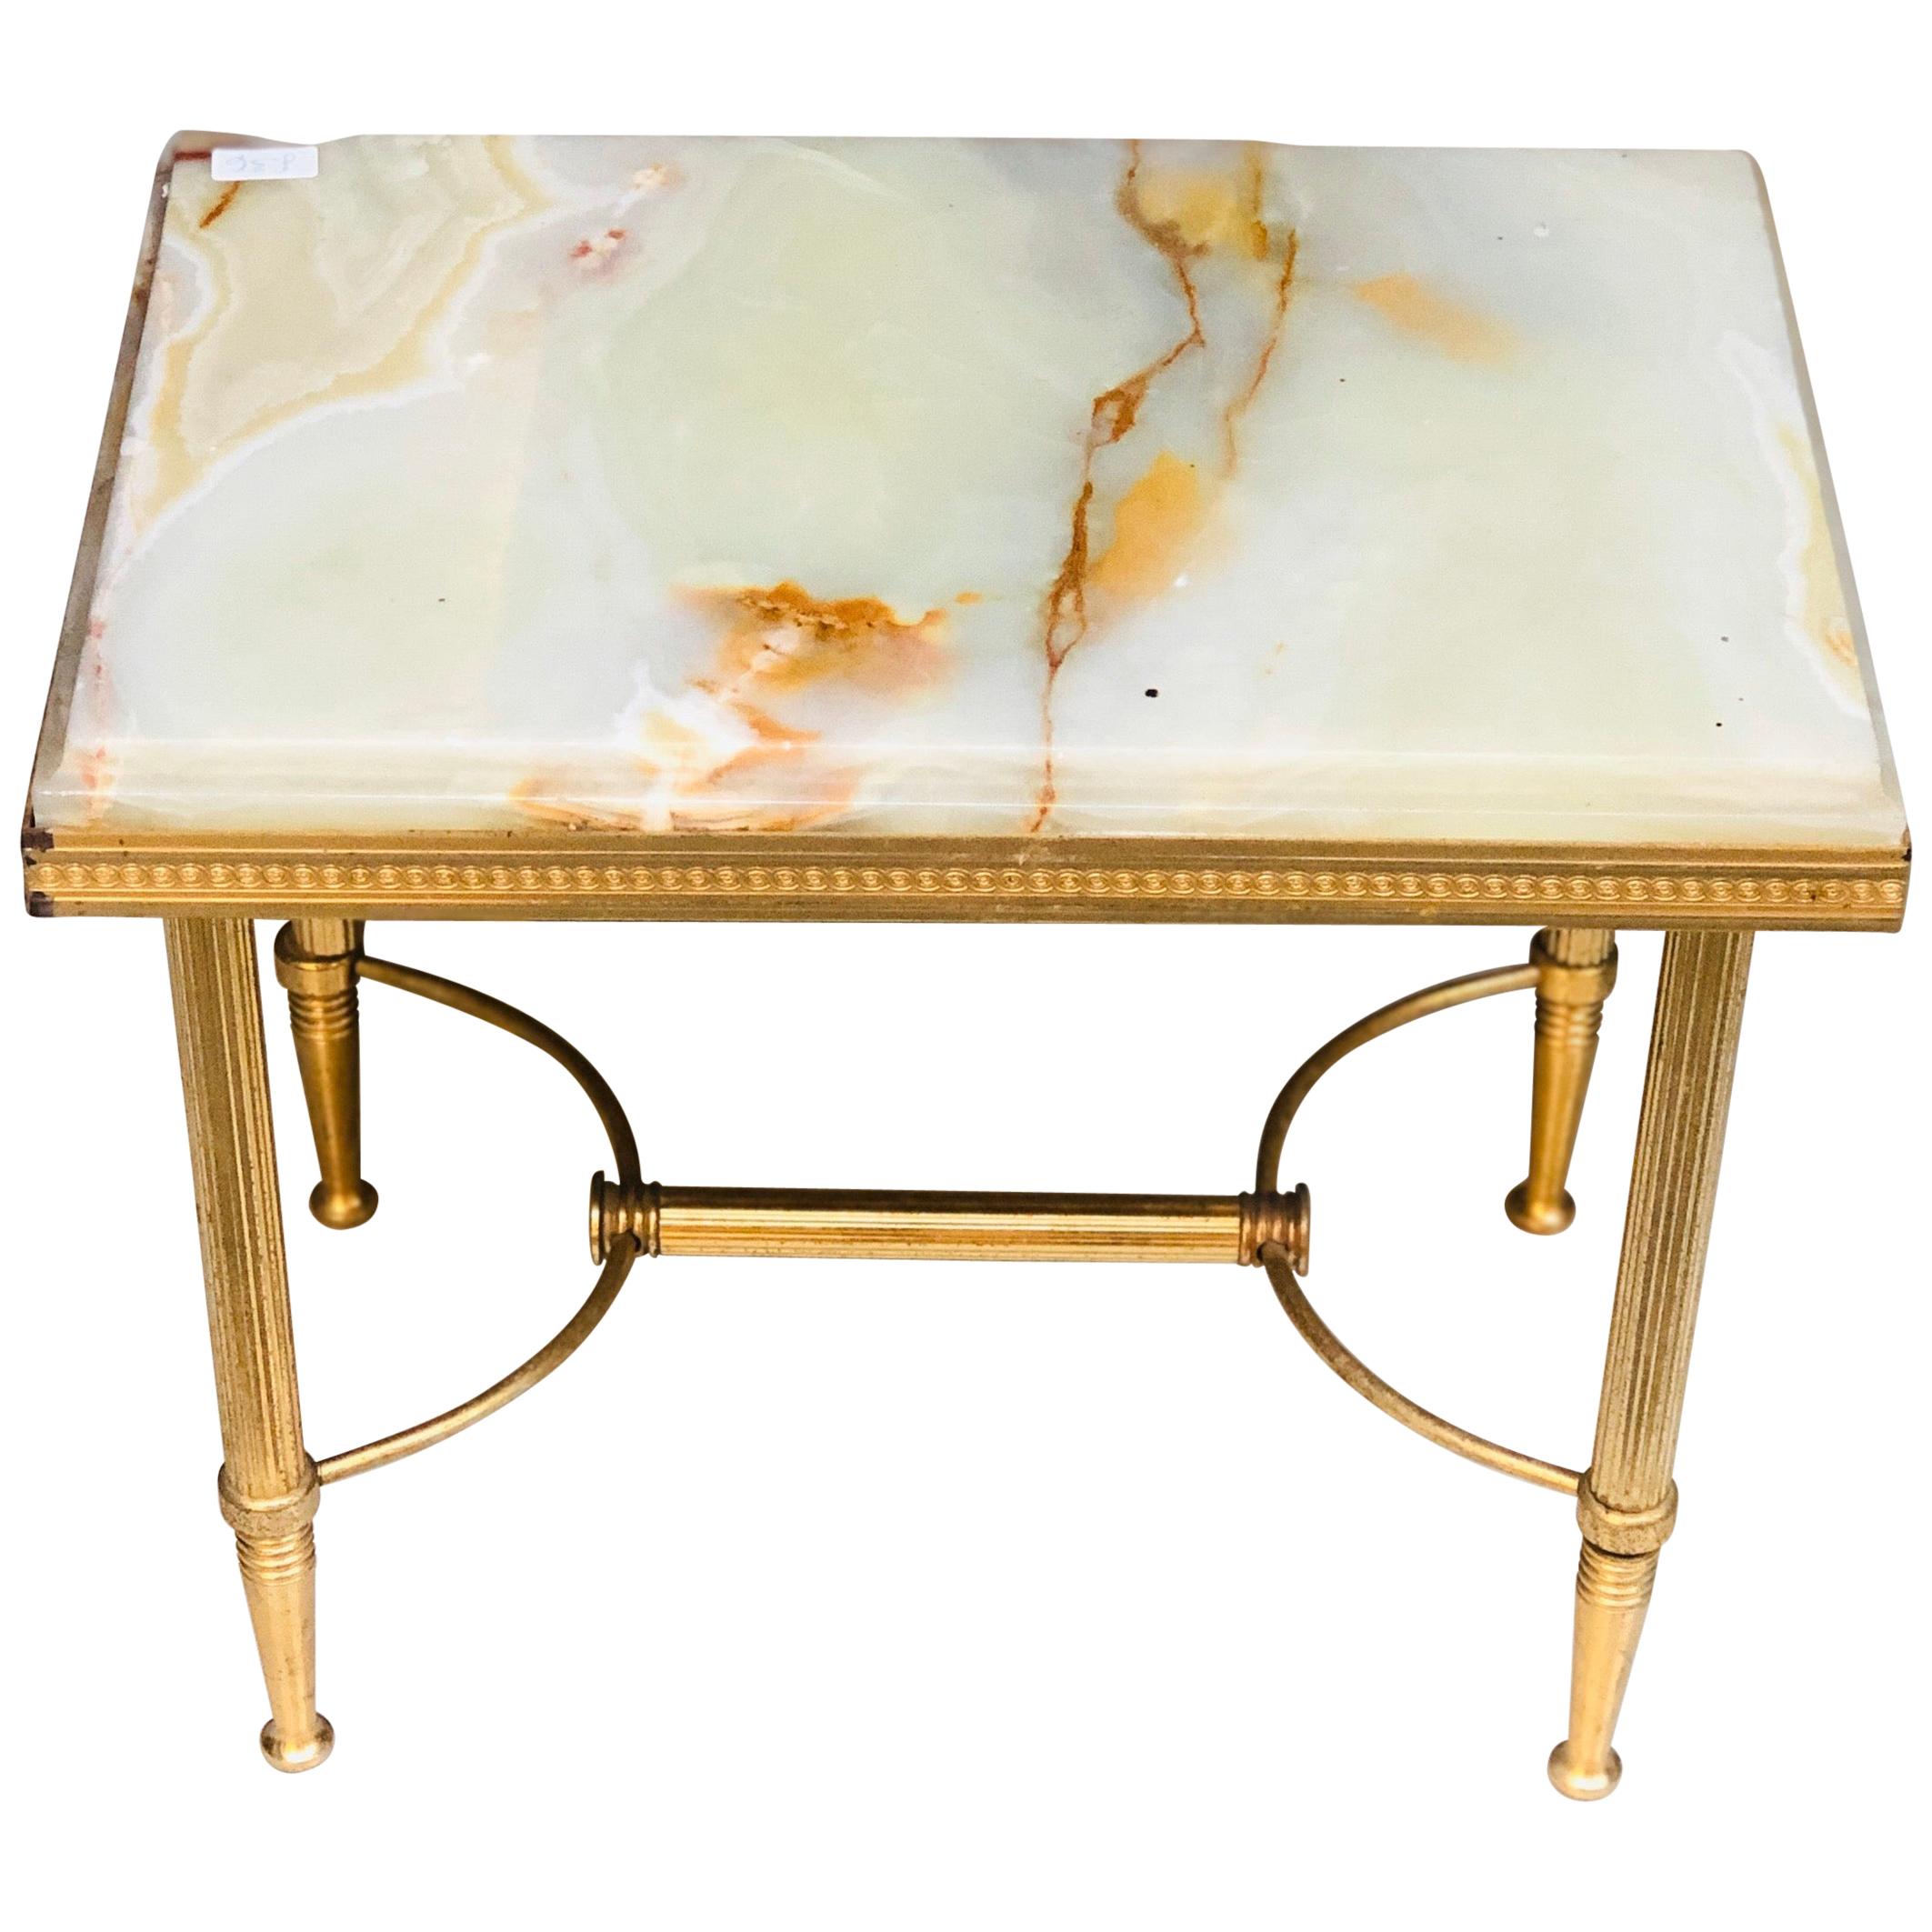 20th Century French Small Marble Top Tray Table Standing on Brass Crossed Legs